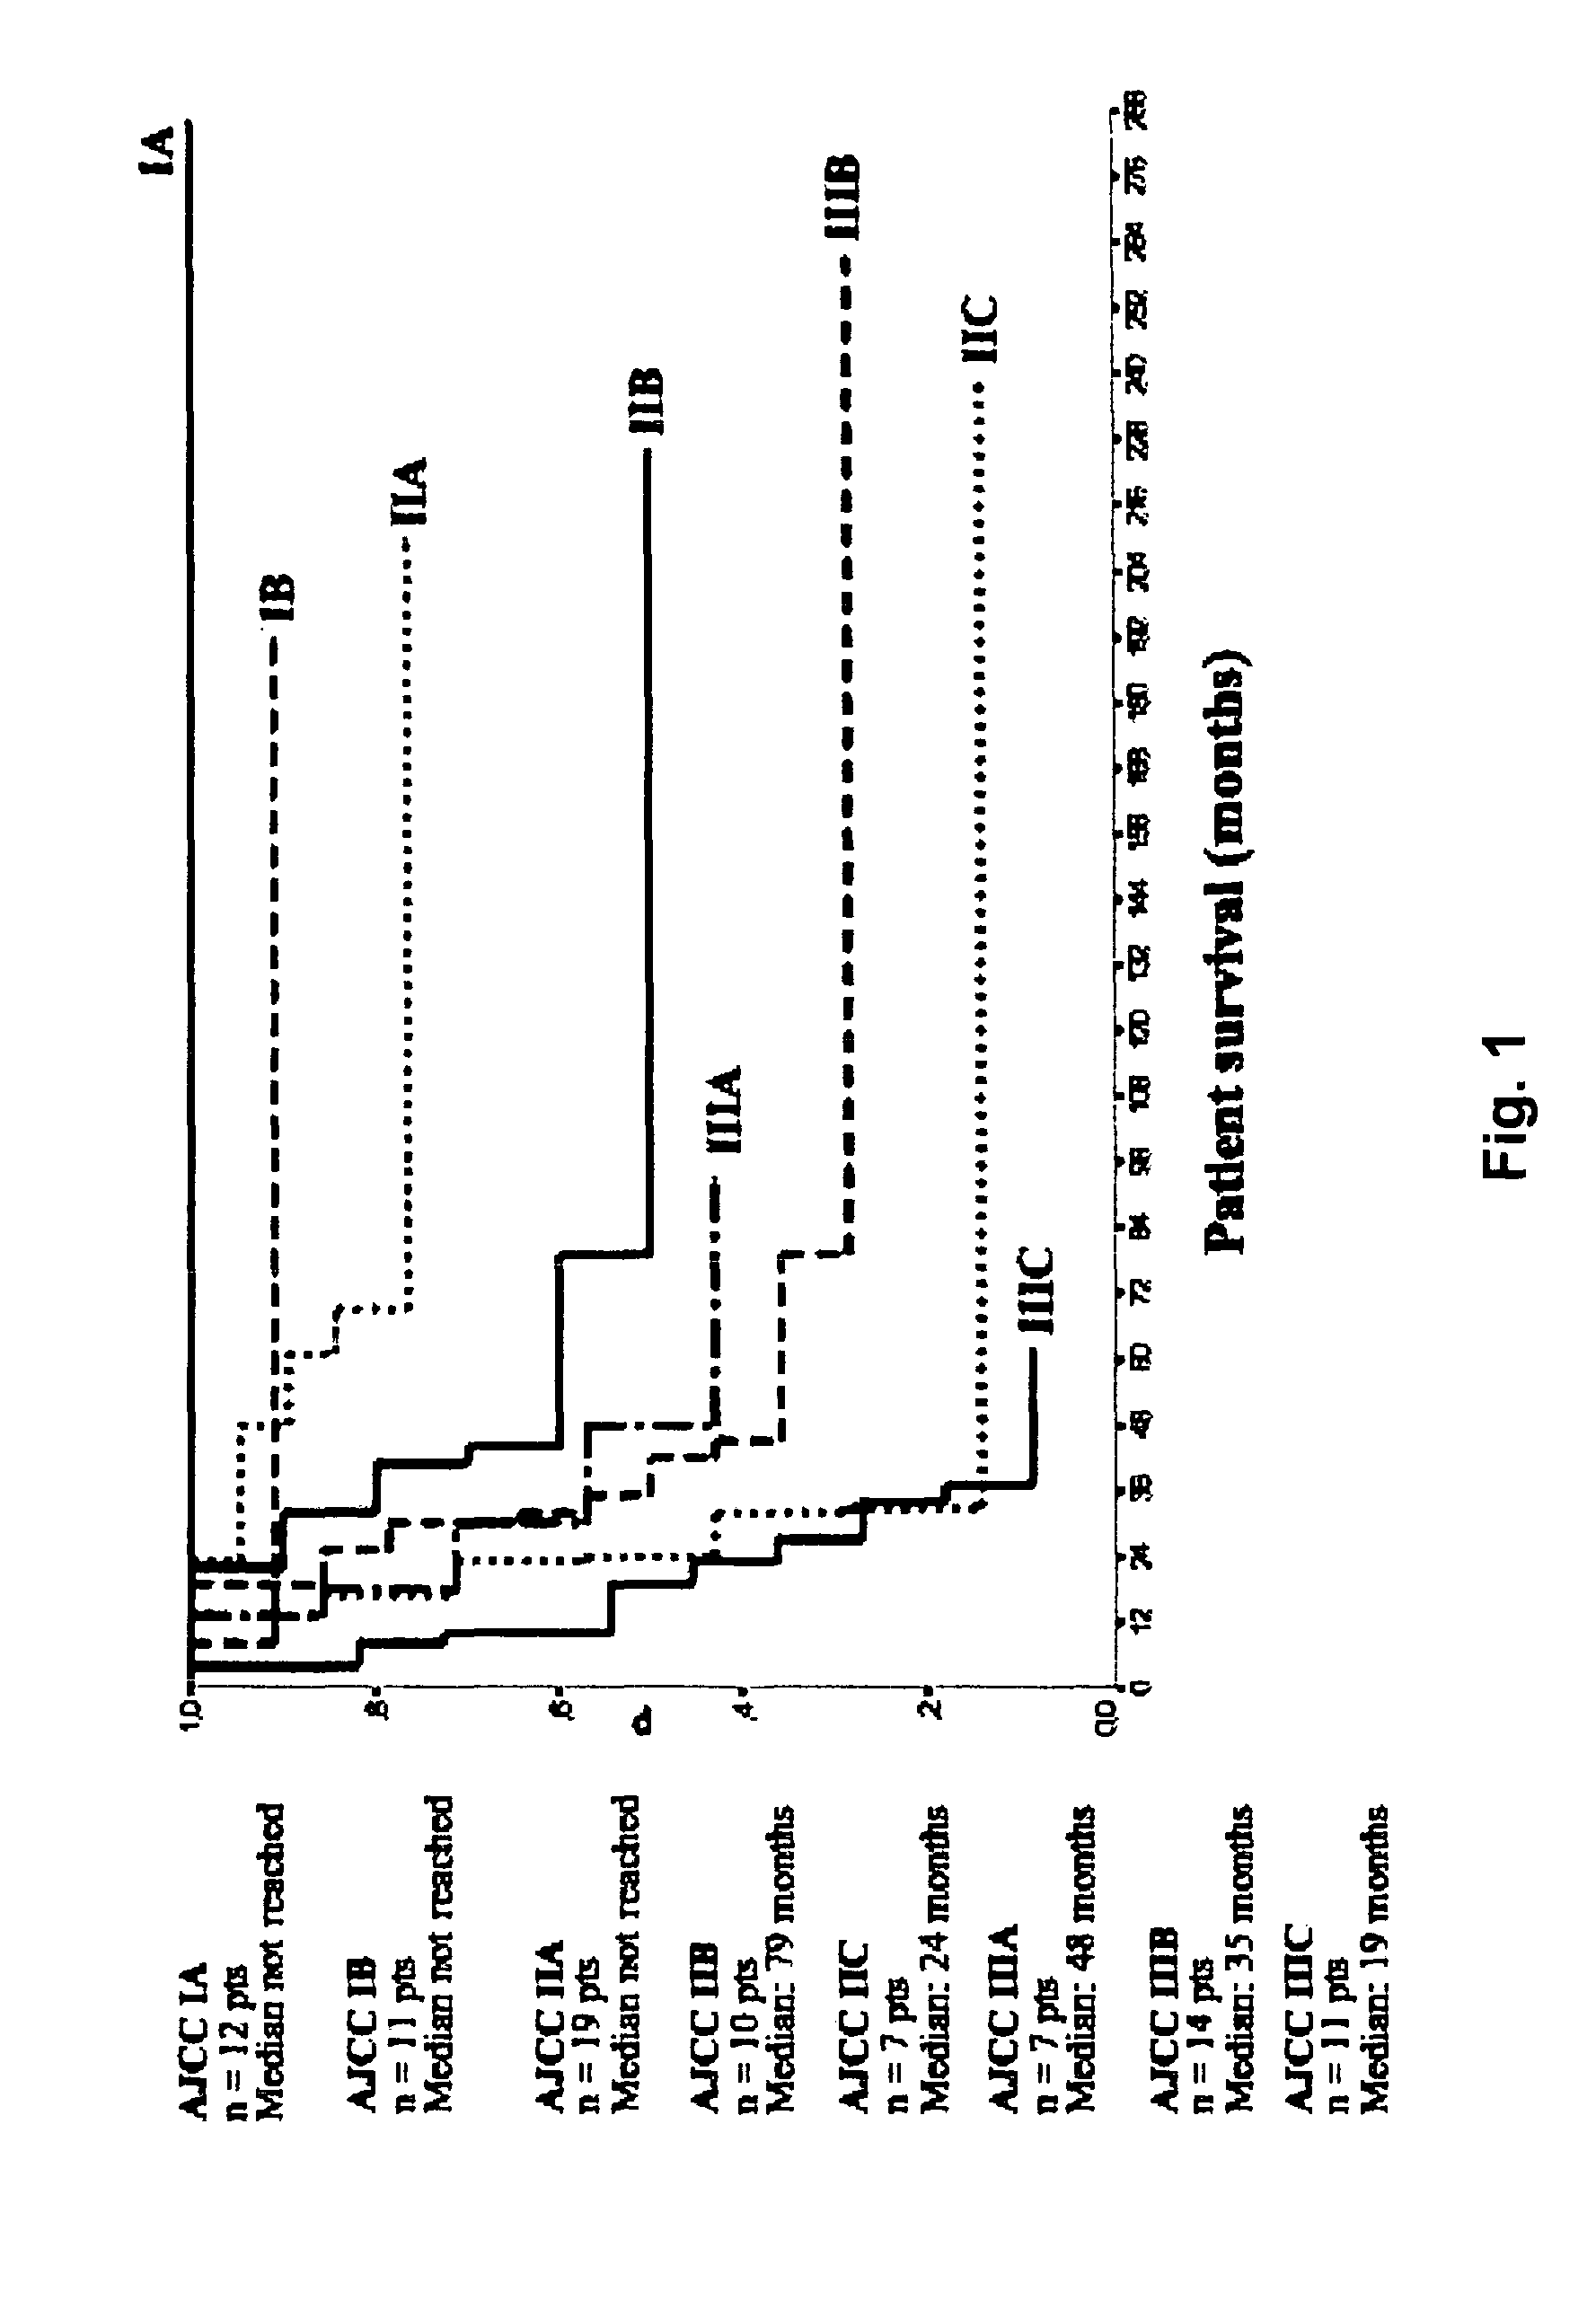 Methods of predicting clinical outcome in malignant melanoma